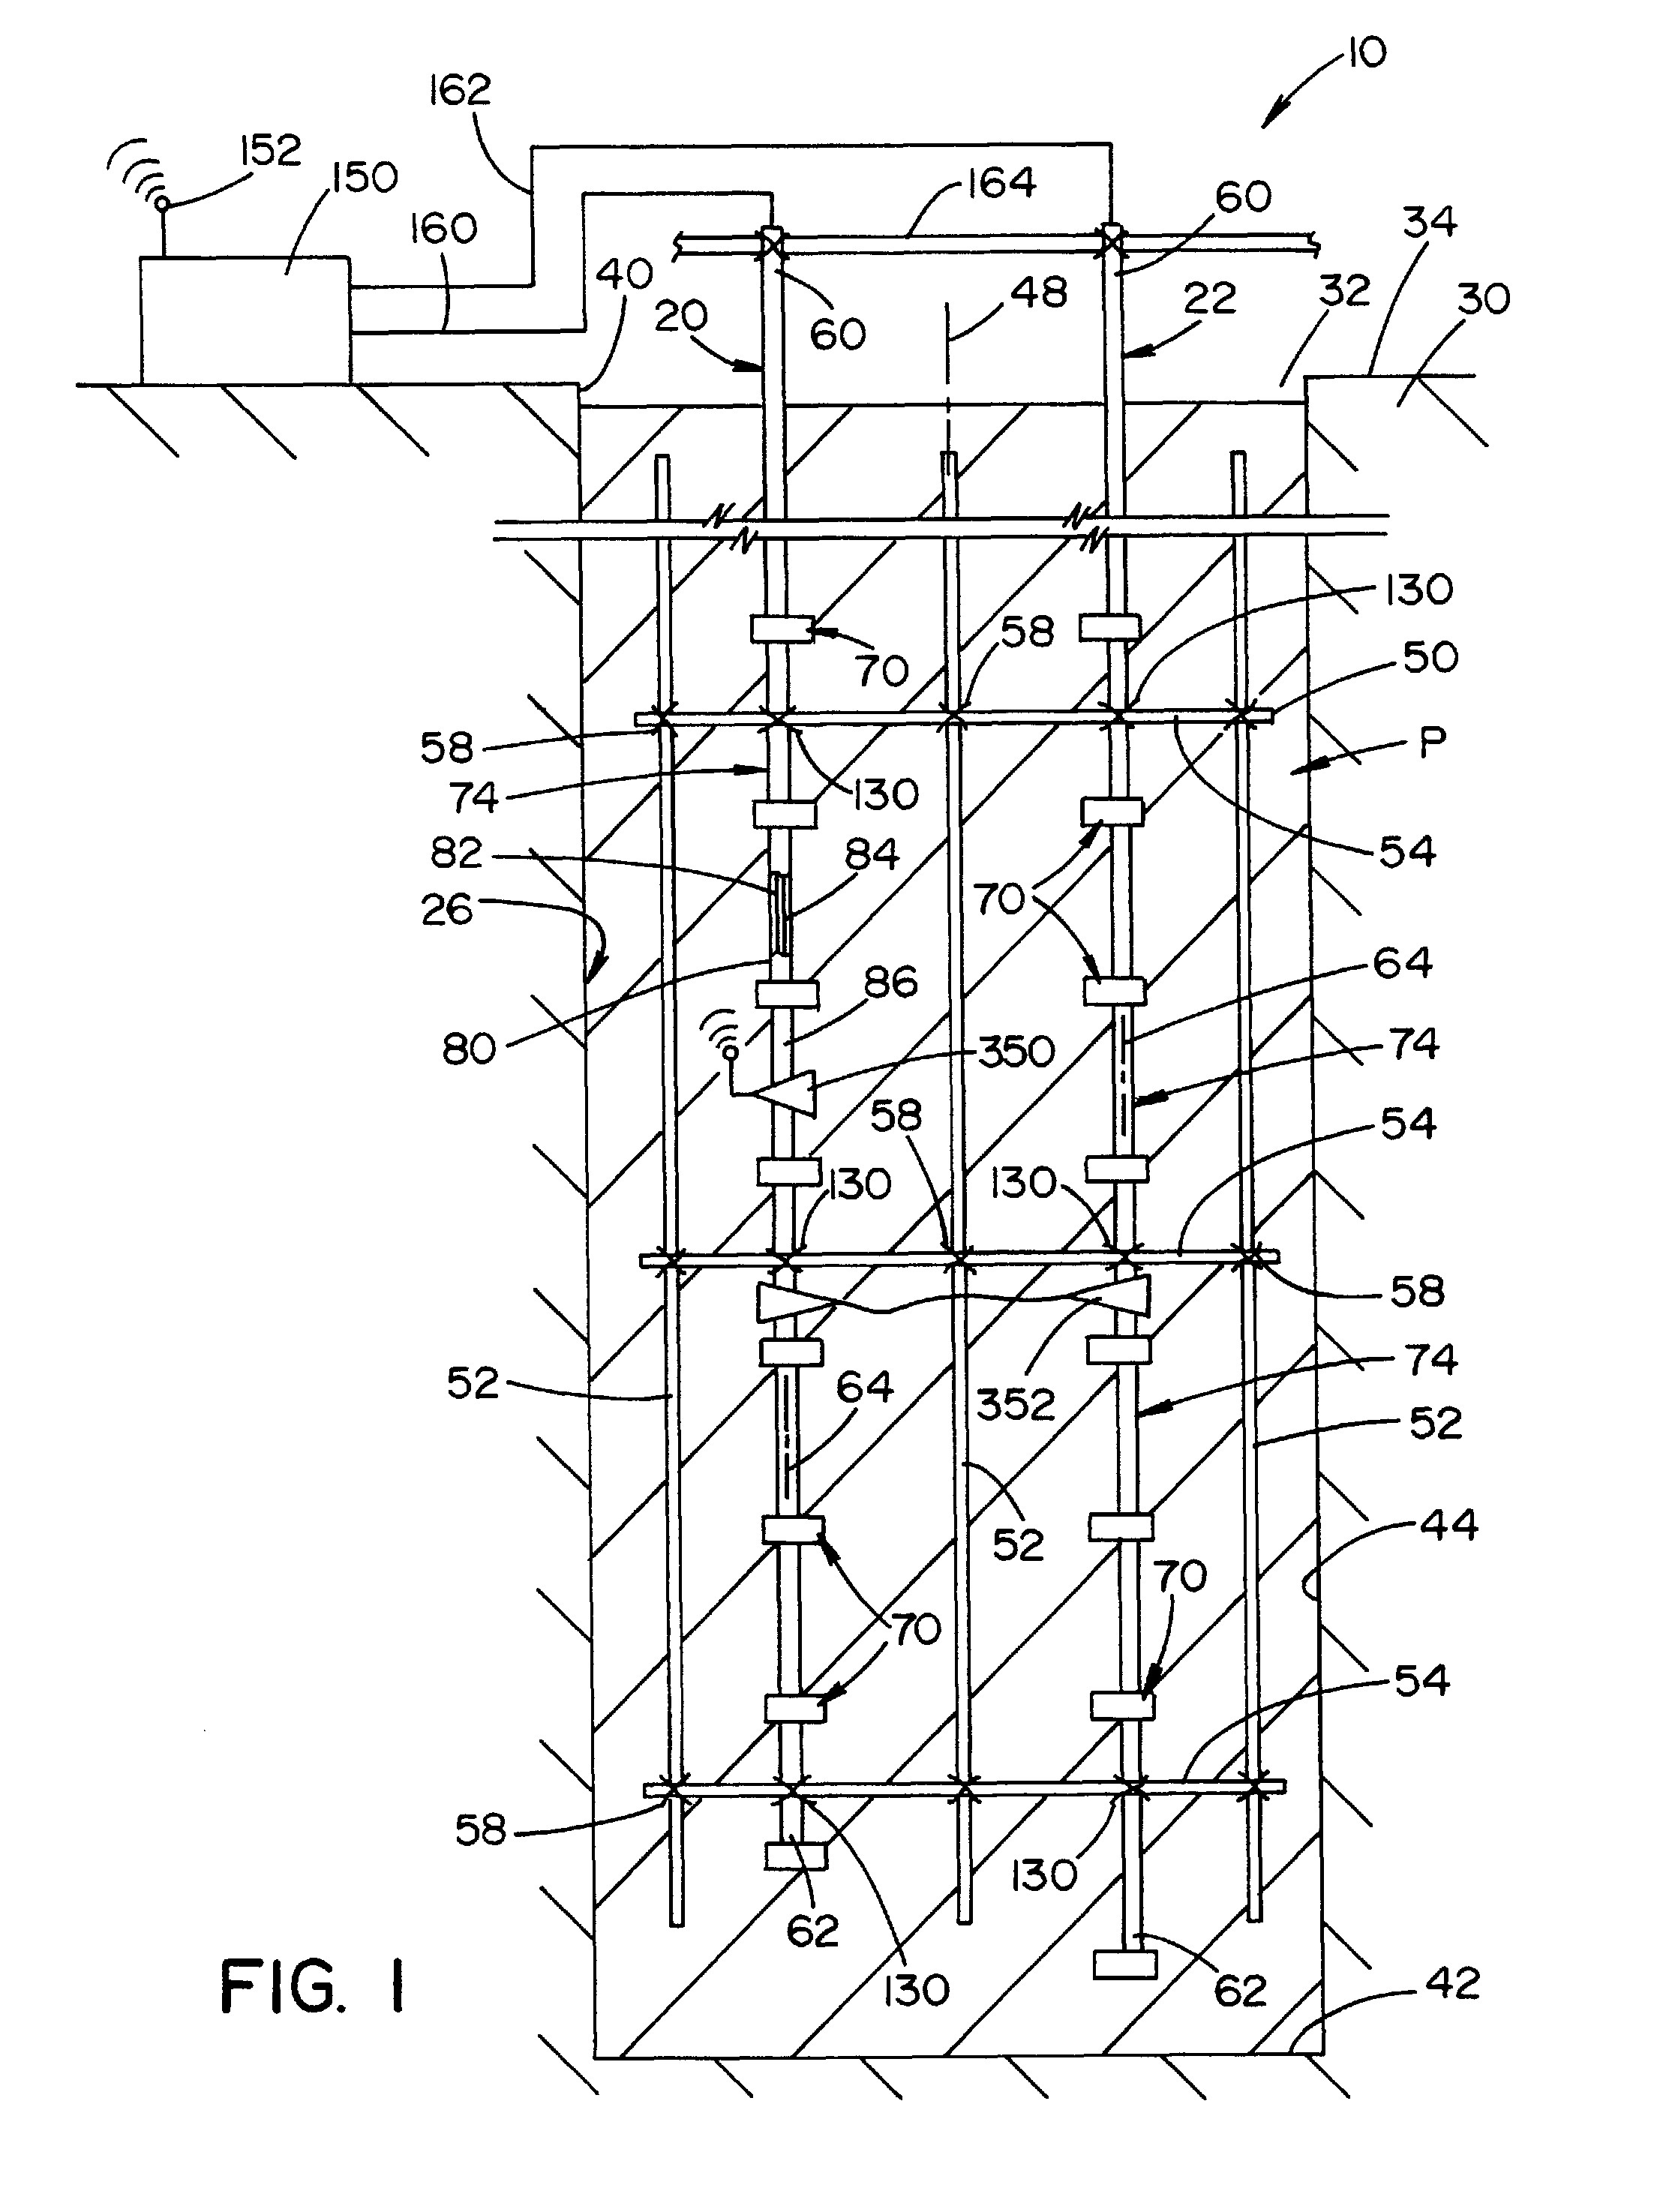 Pile sensing device and method of using the same